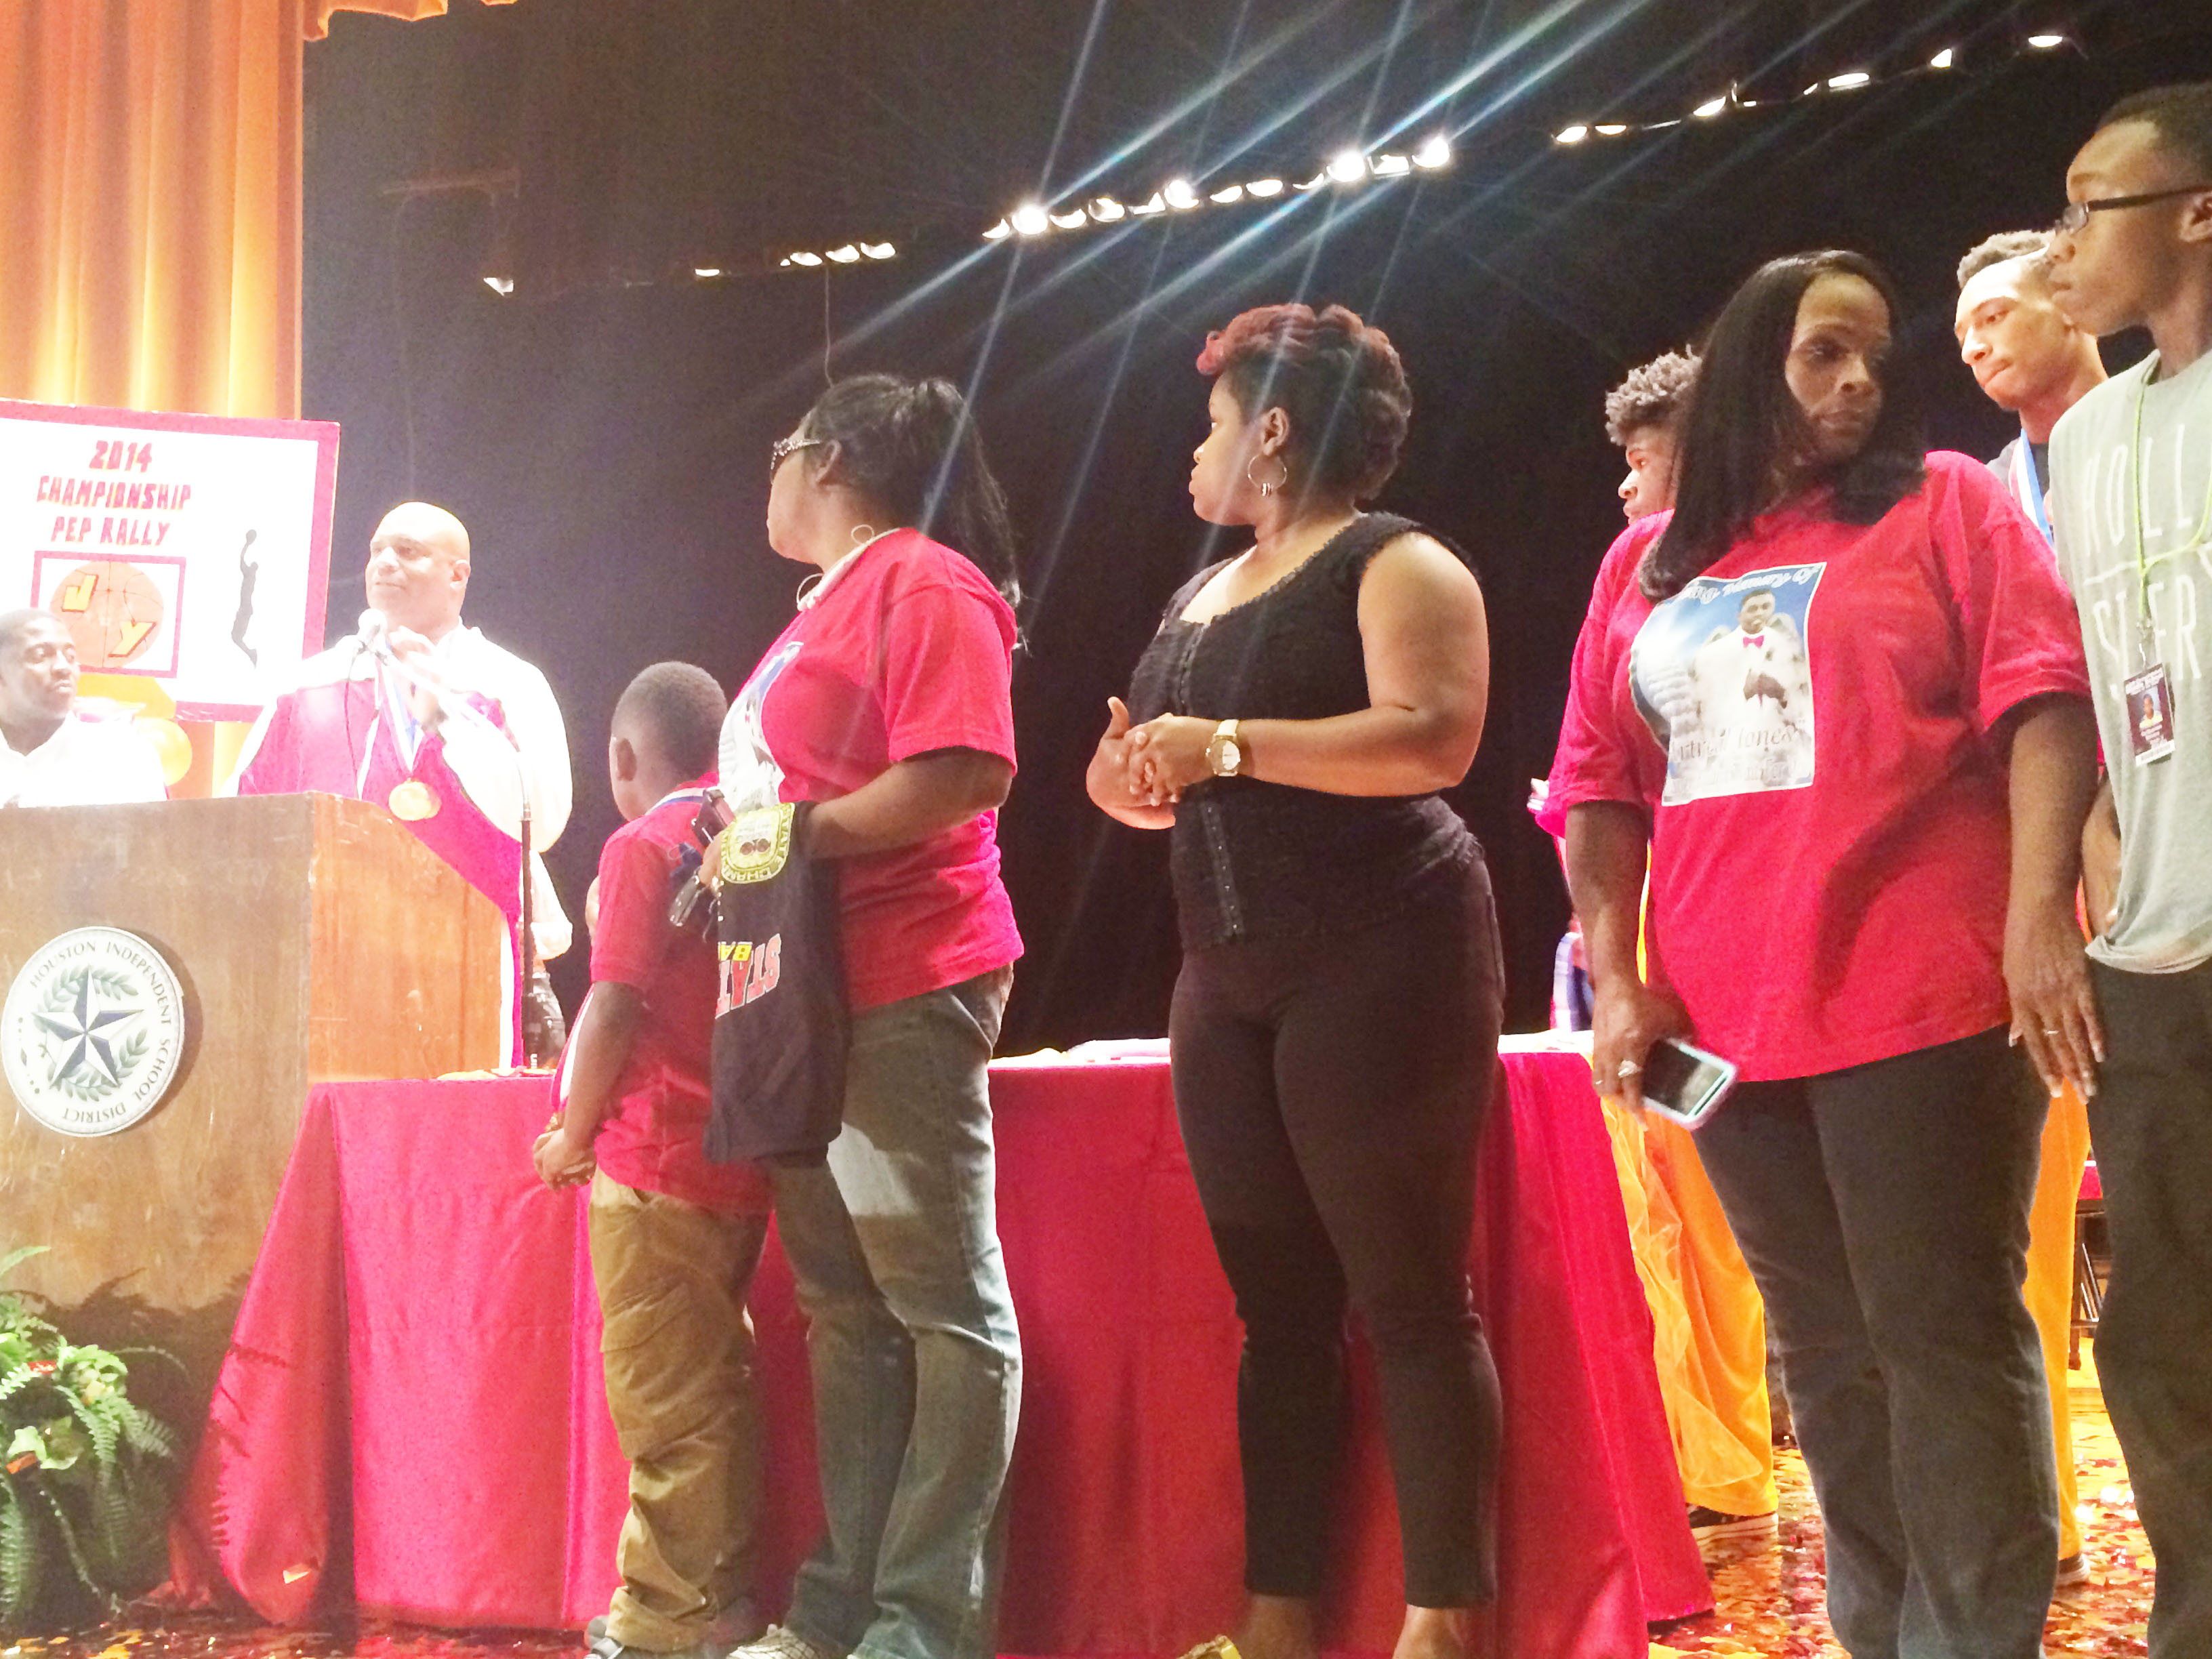 Artreal Jones family, a fallen Yates Basketball player who was on the championship team, accepts his awards